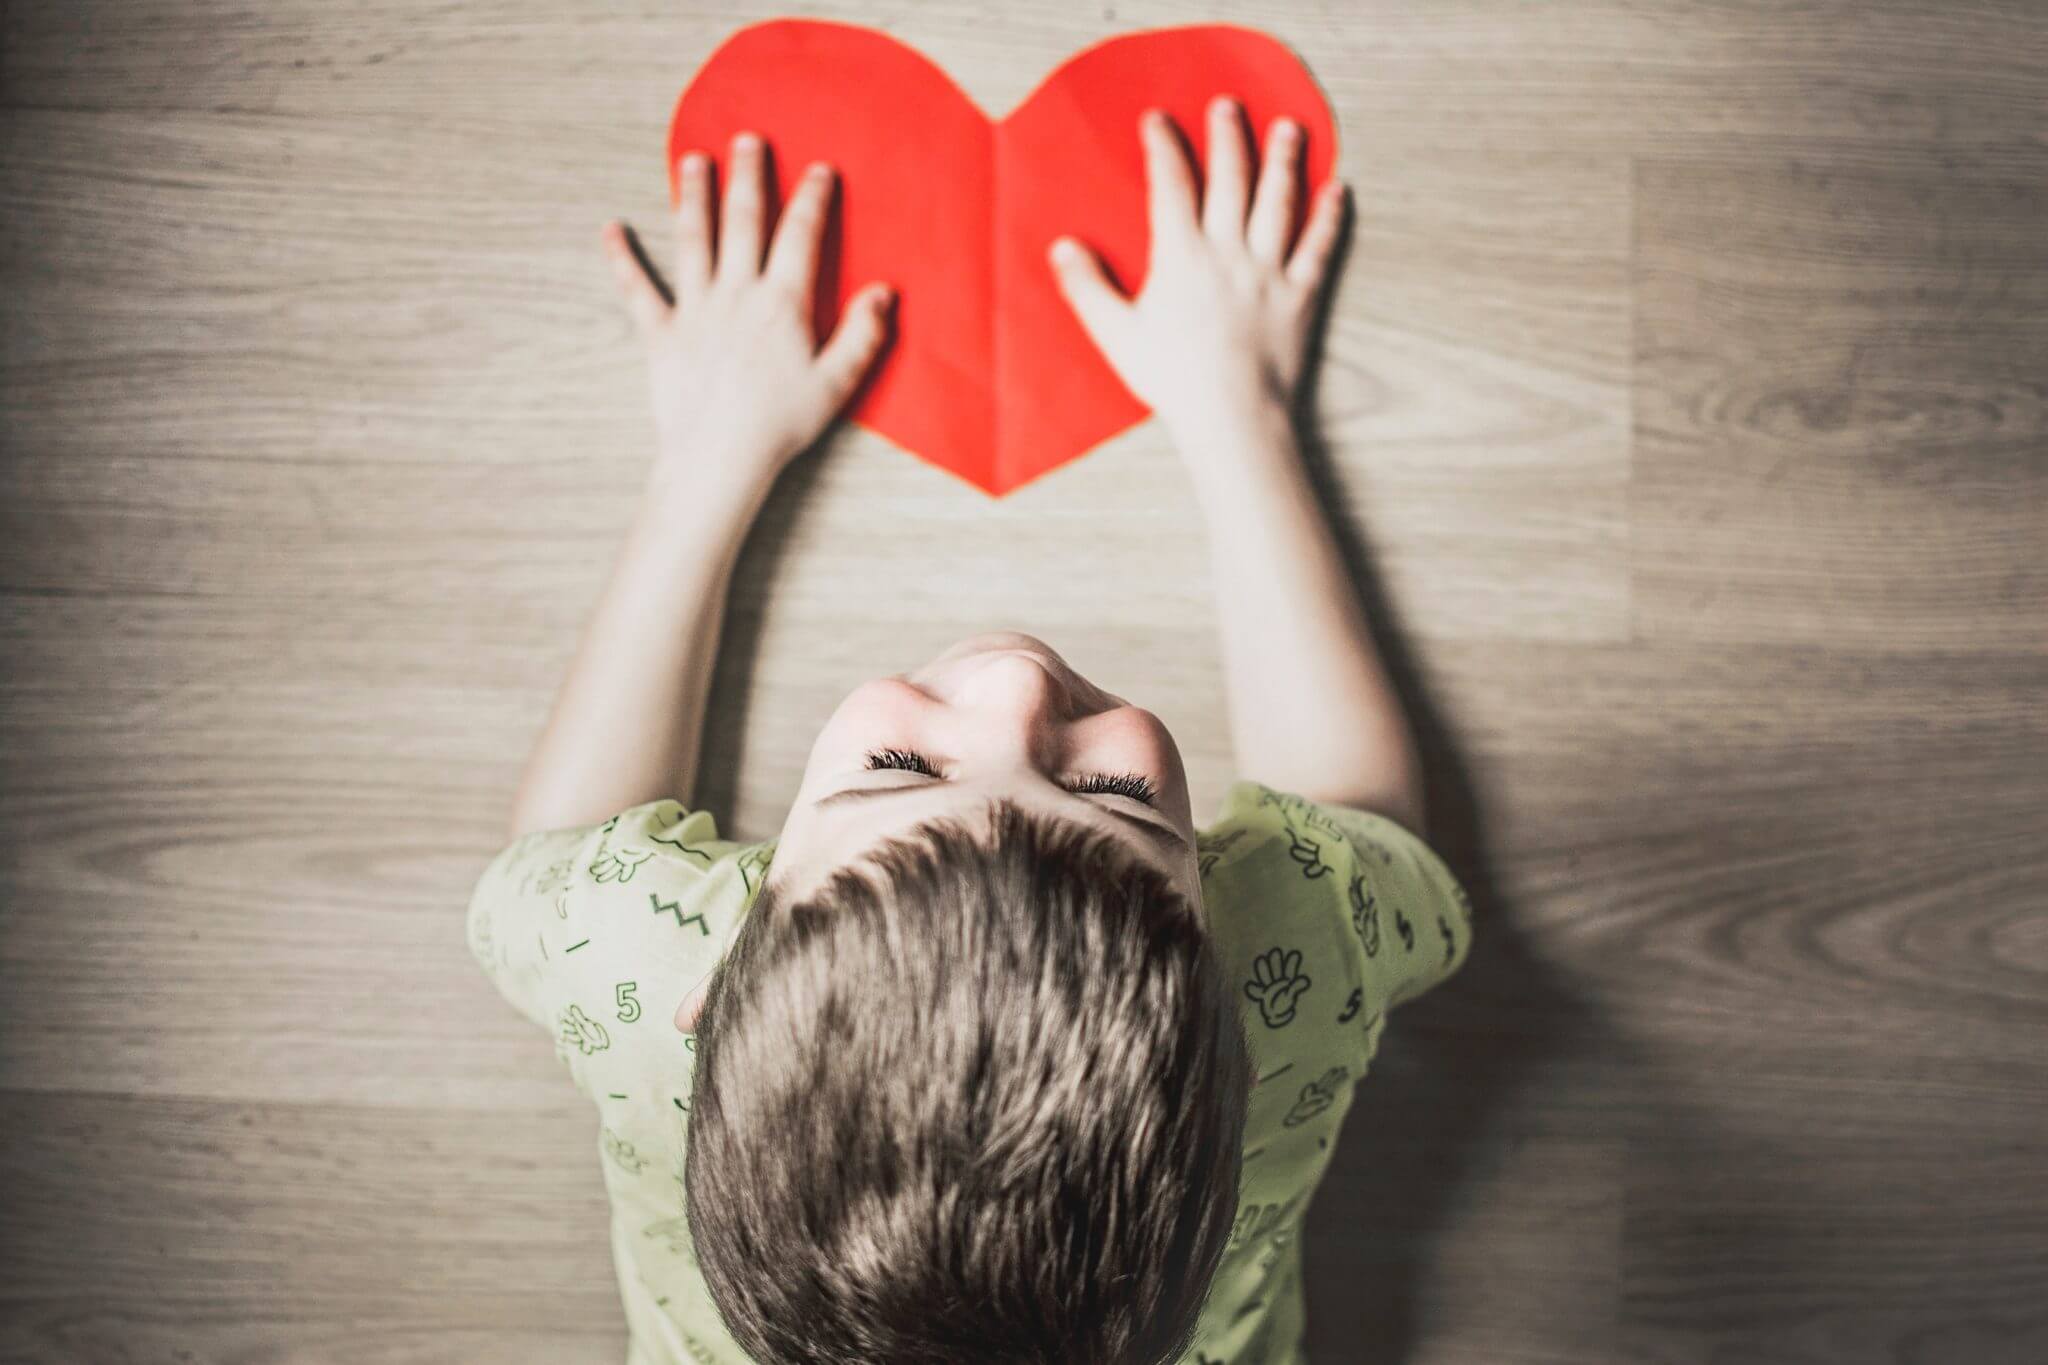 Little boy laying on the floor with hands on a red cut out paper heart.